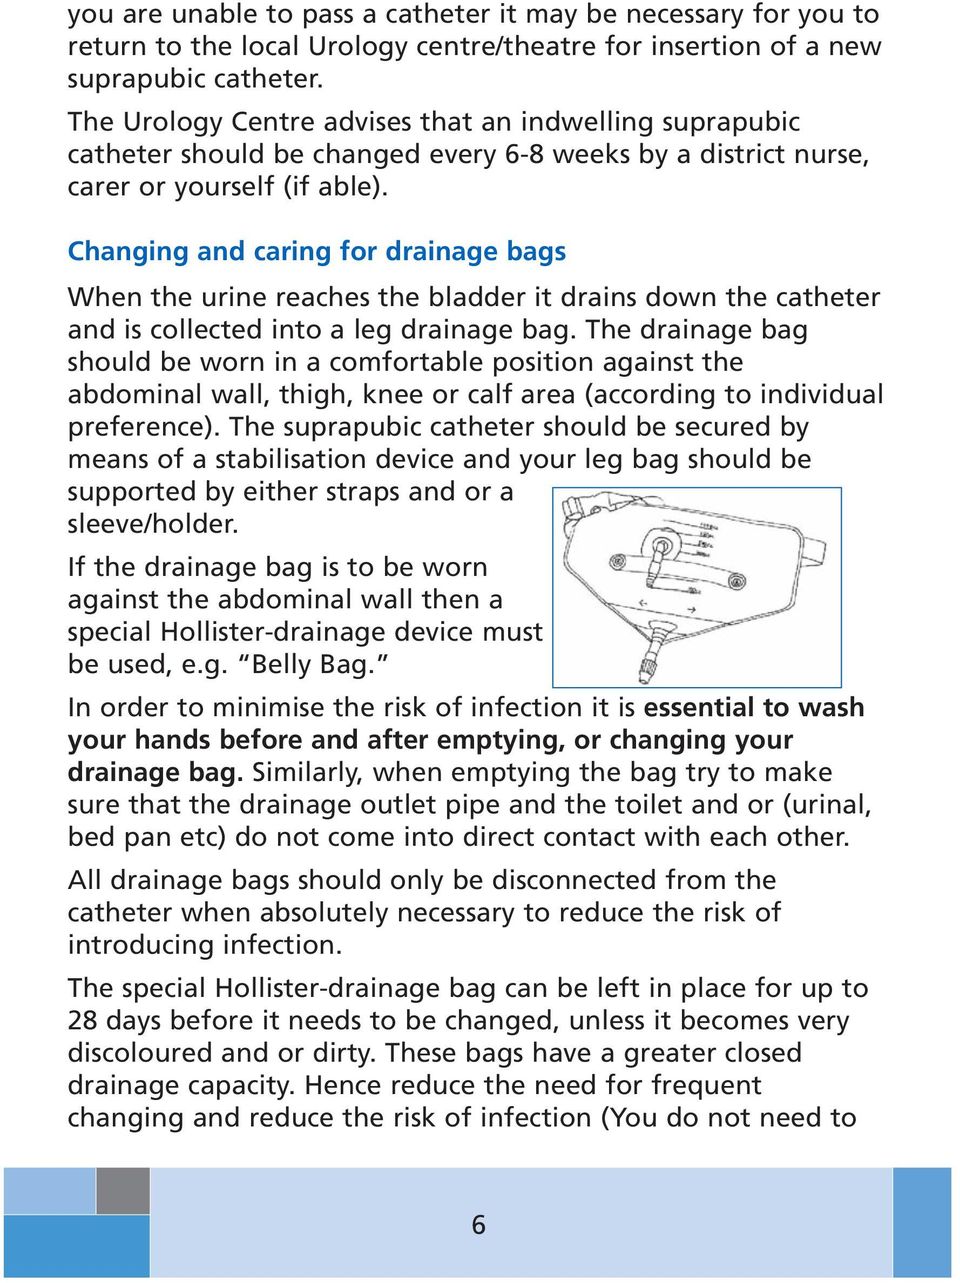 Changing and caring for drainage bags When the urine reaches the bladder it drains down the catheter and is collected into a leg drainage bag.